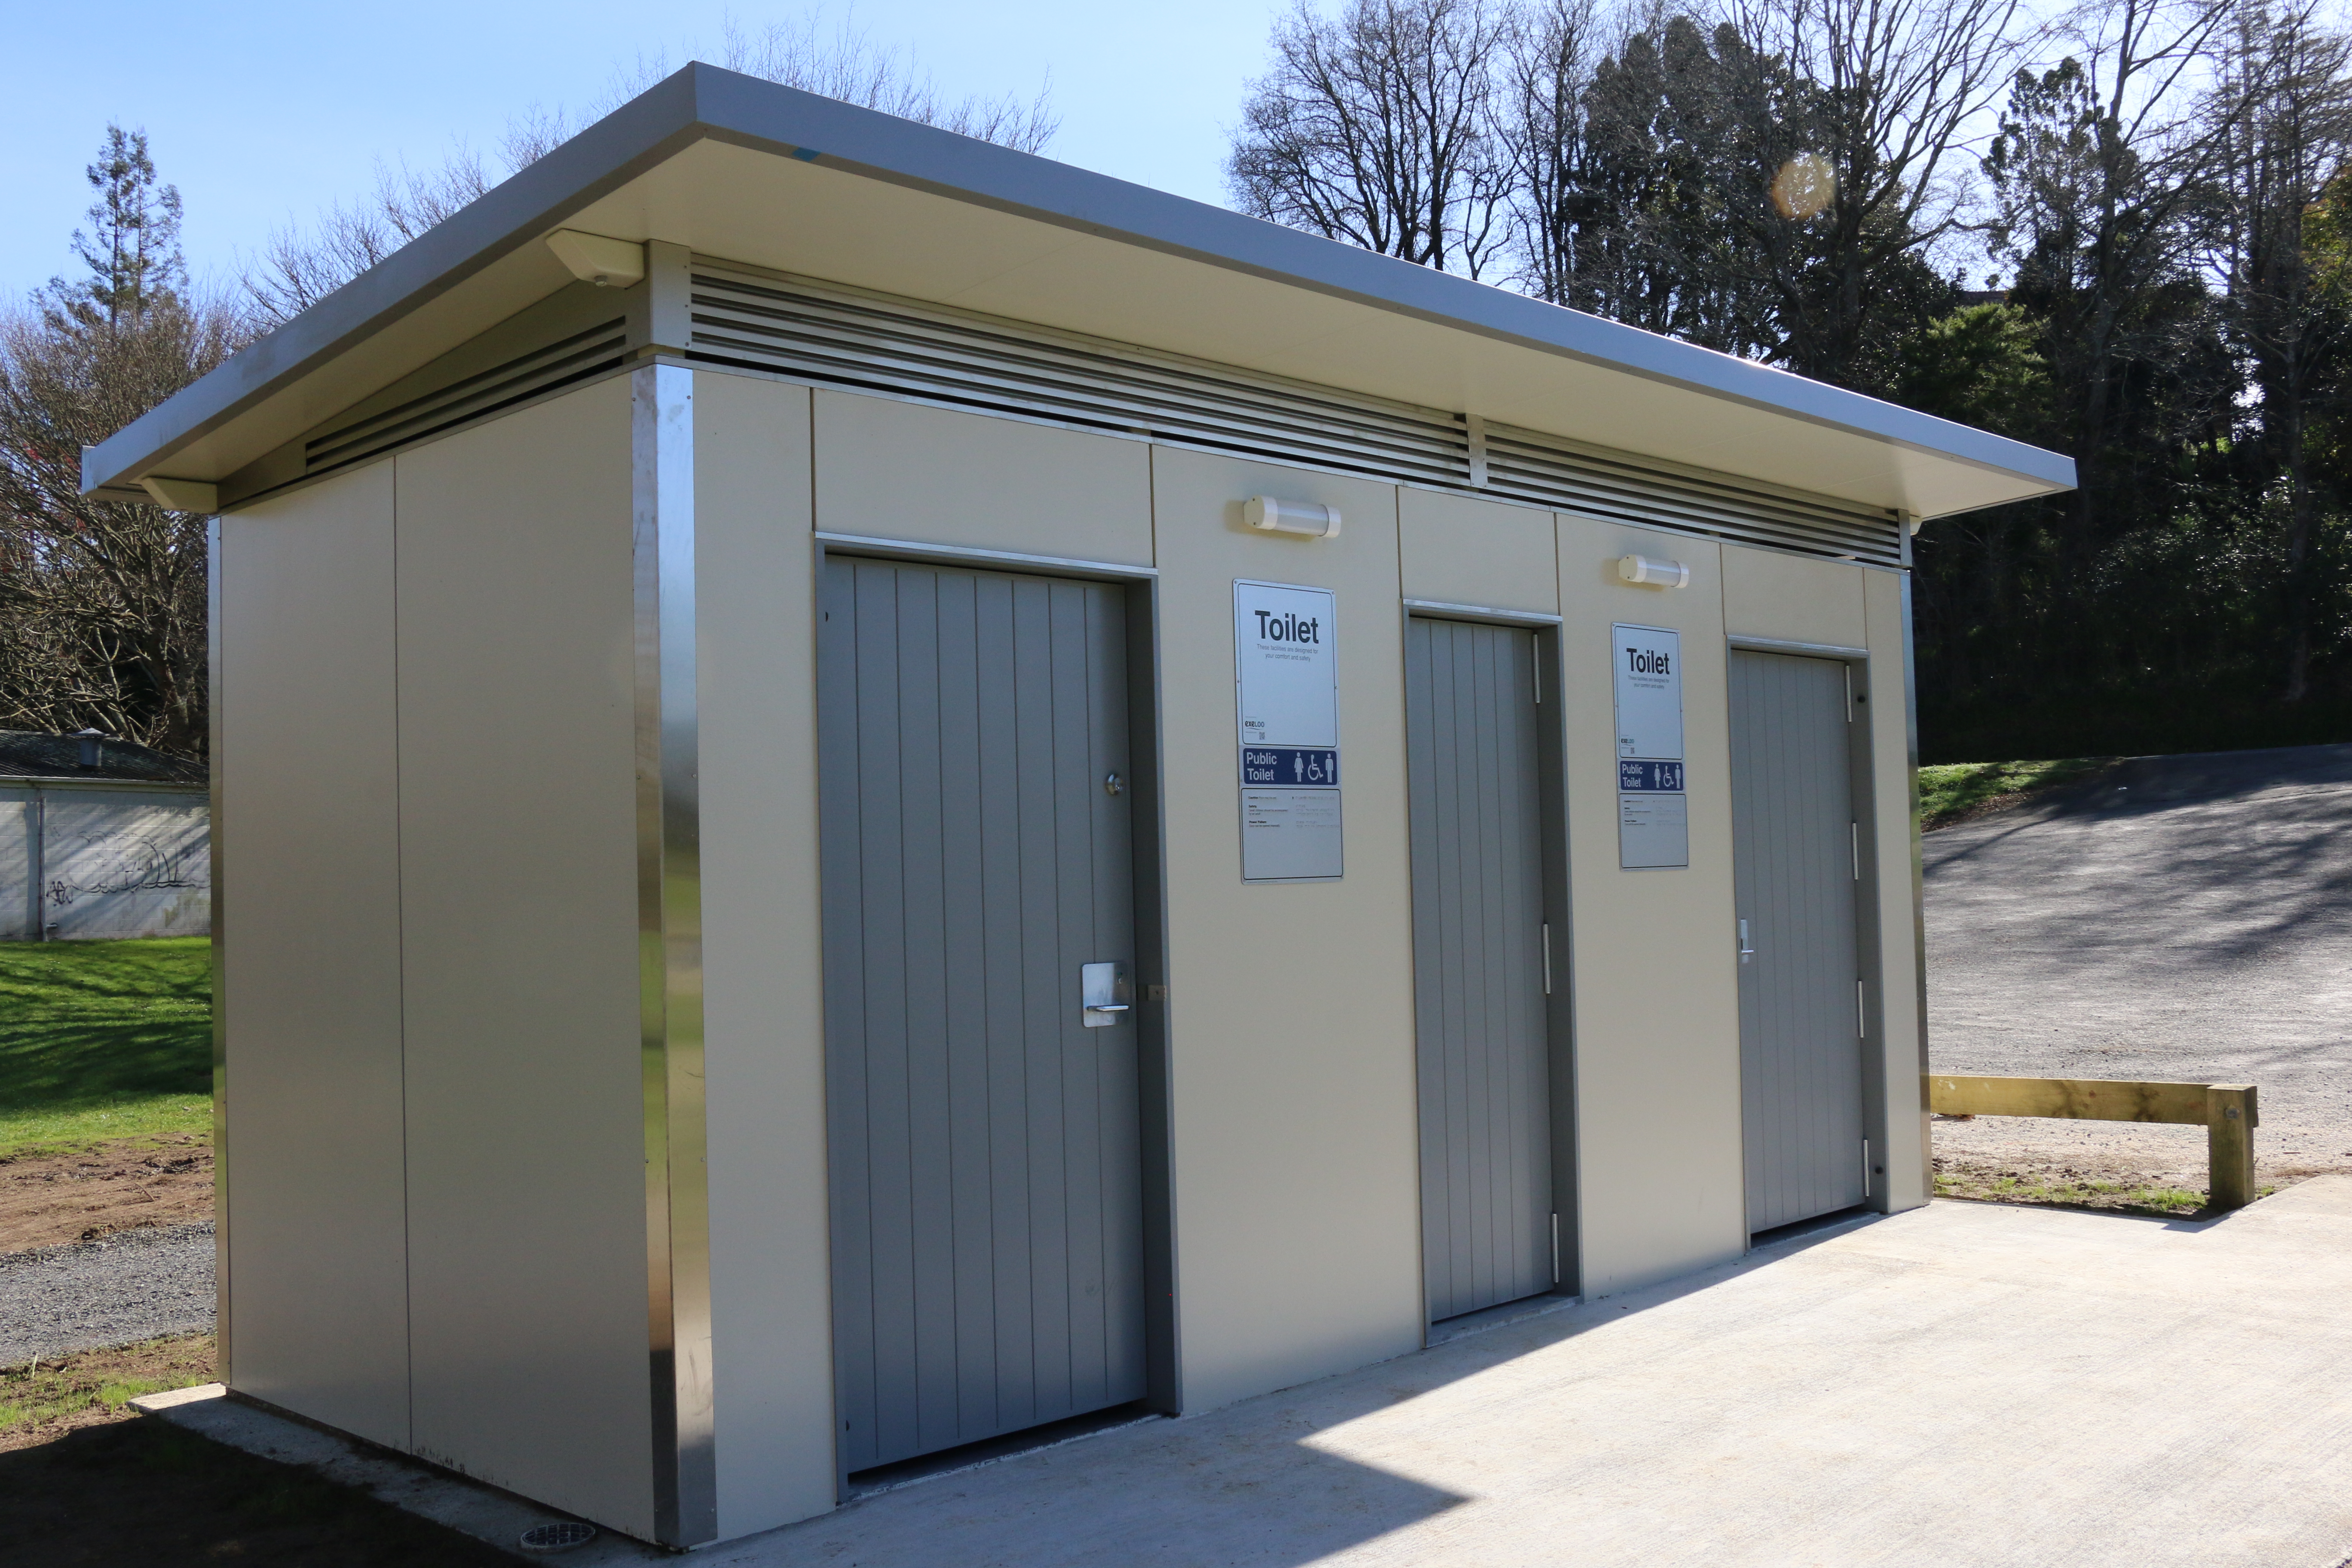 The Designer Dunny competition invites local artists to design the exterior of the new toilet block at Centennial Park on Rewi Street, Te Awamutu.